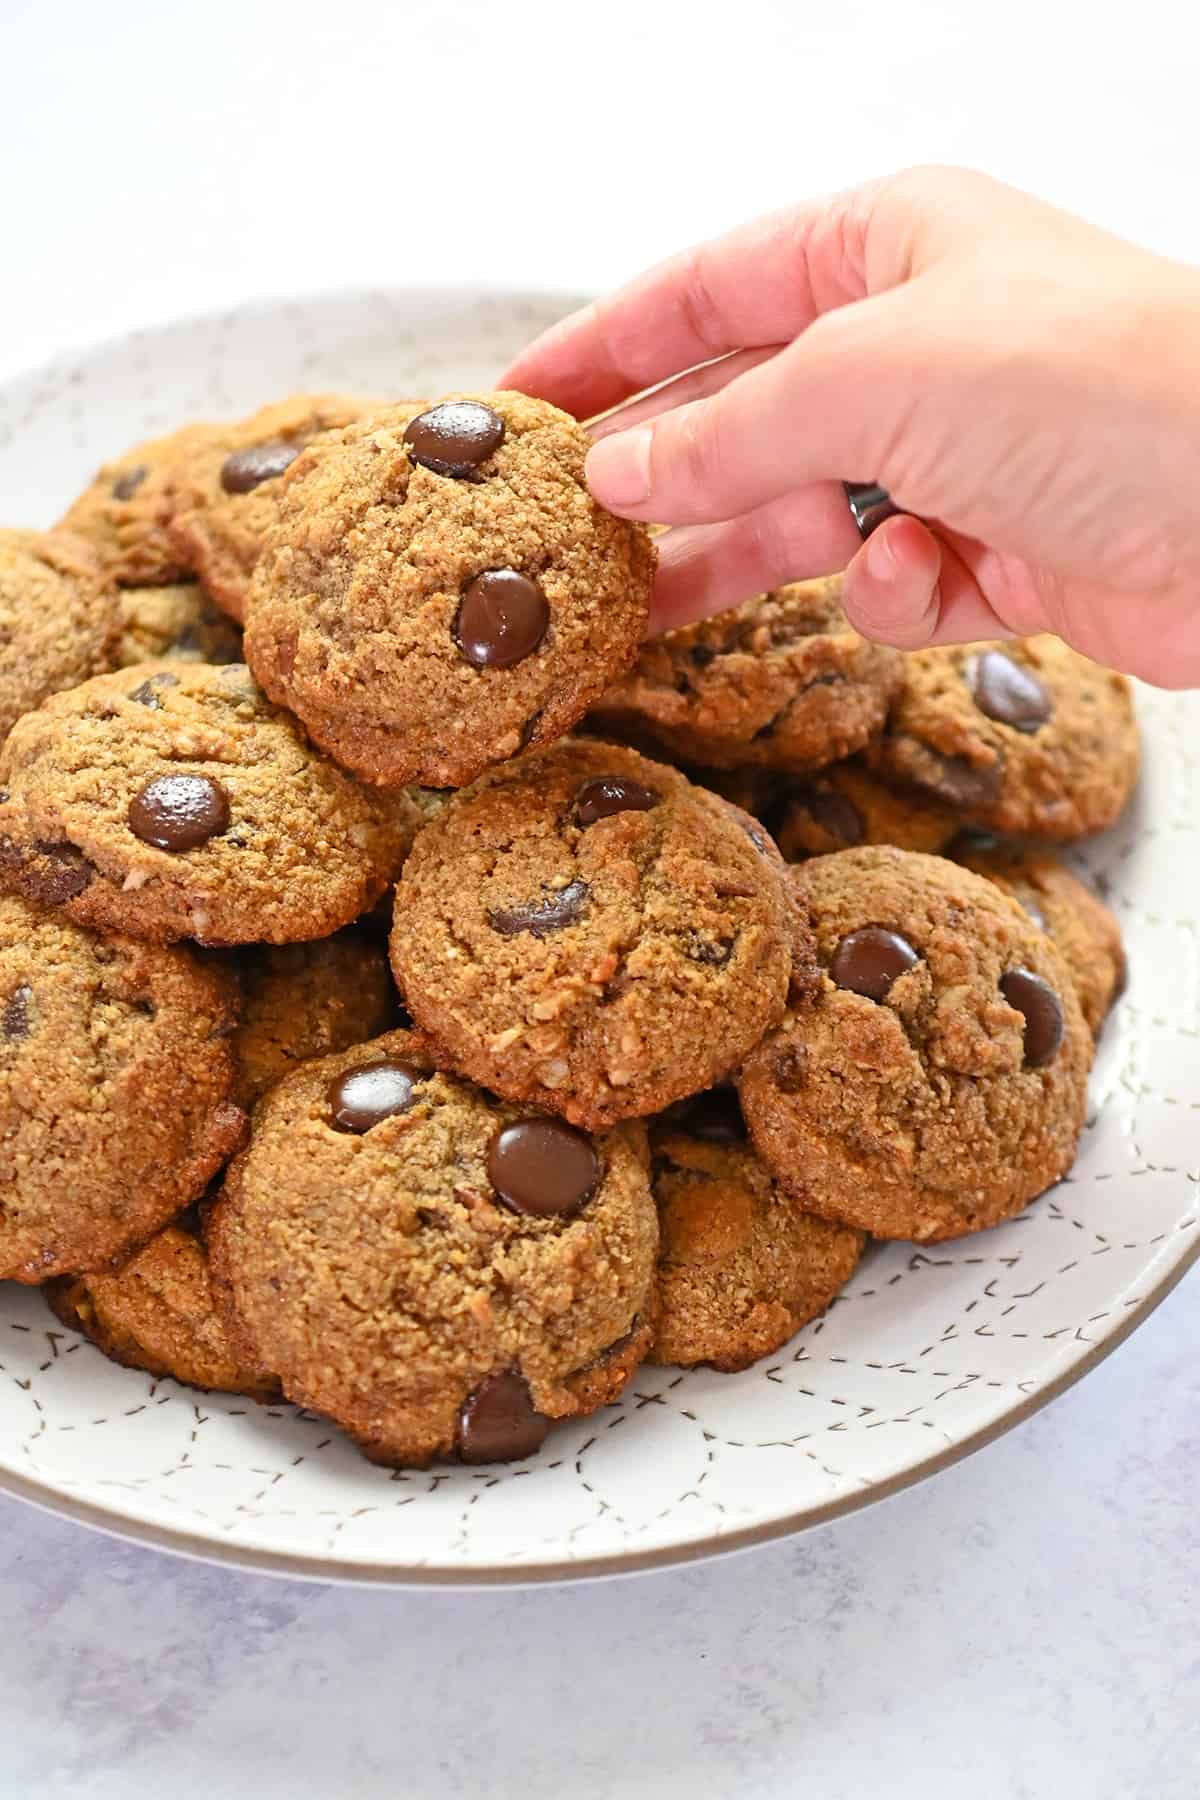 A hand is grabbing a paleo banana chocolate chip cookie from a white plate piled high with cookies.